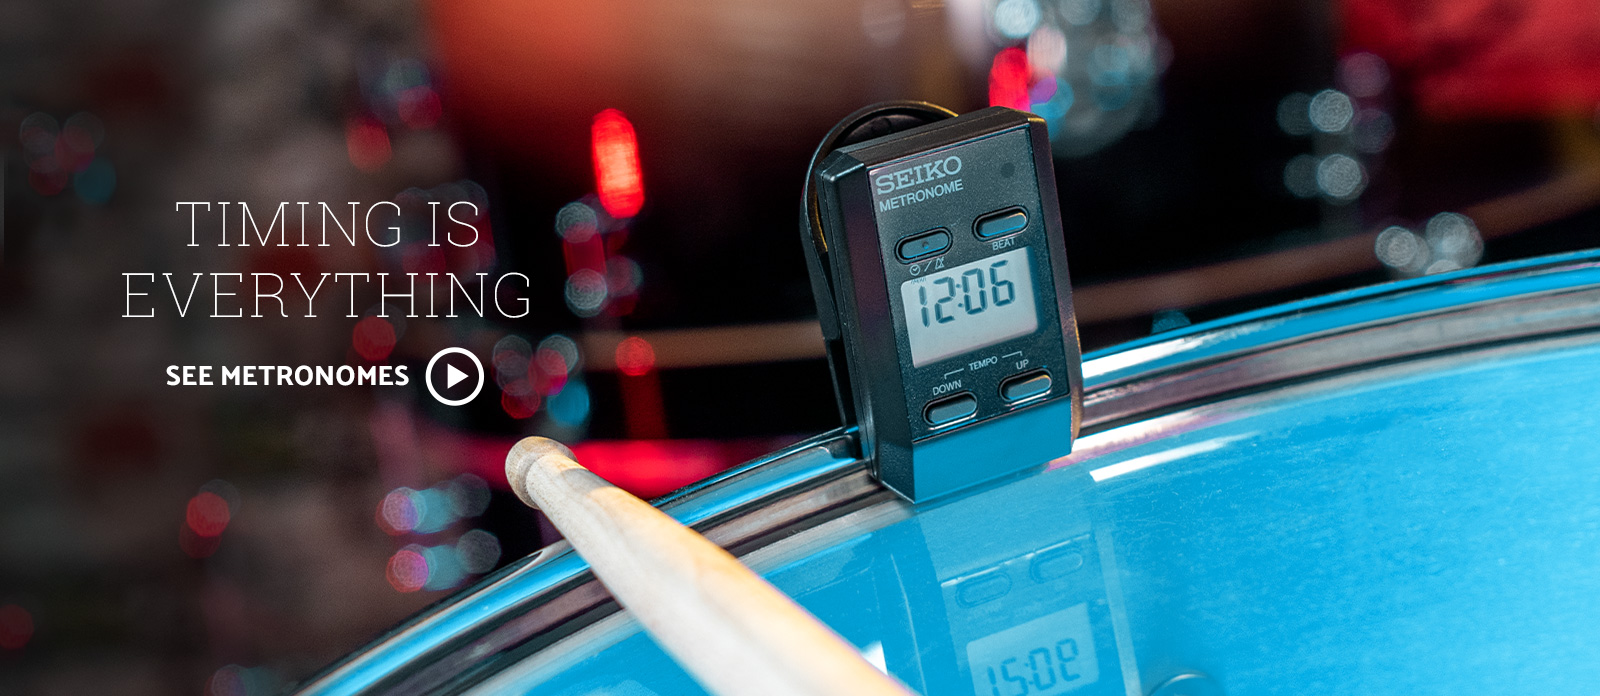 Seiko clip on metronome clipped to a drum kit. Image is lit with red and blue stage lighting. Text says Timing is Everything, click to see metronomes.